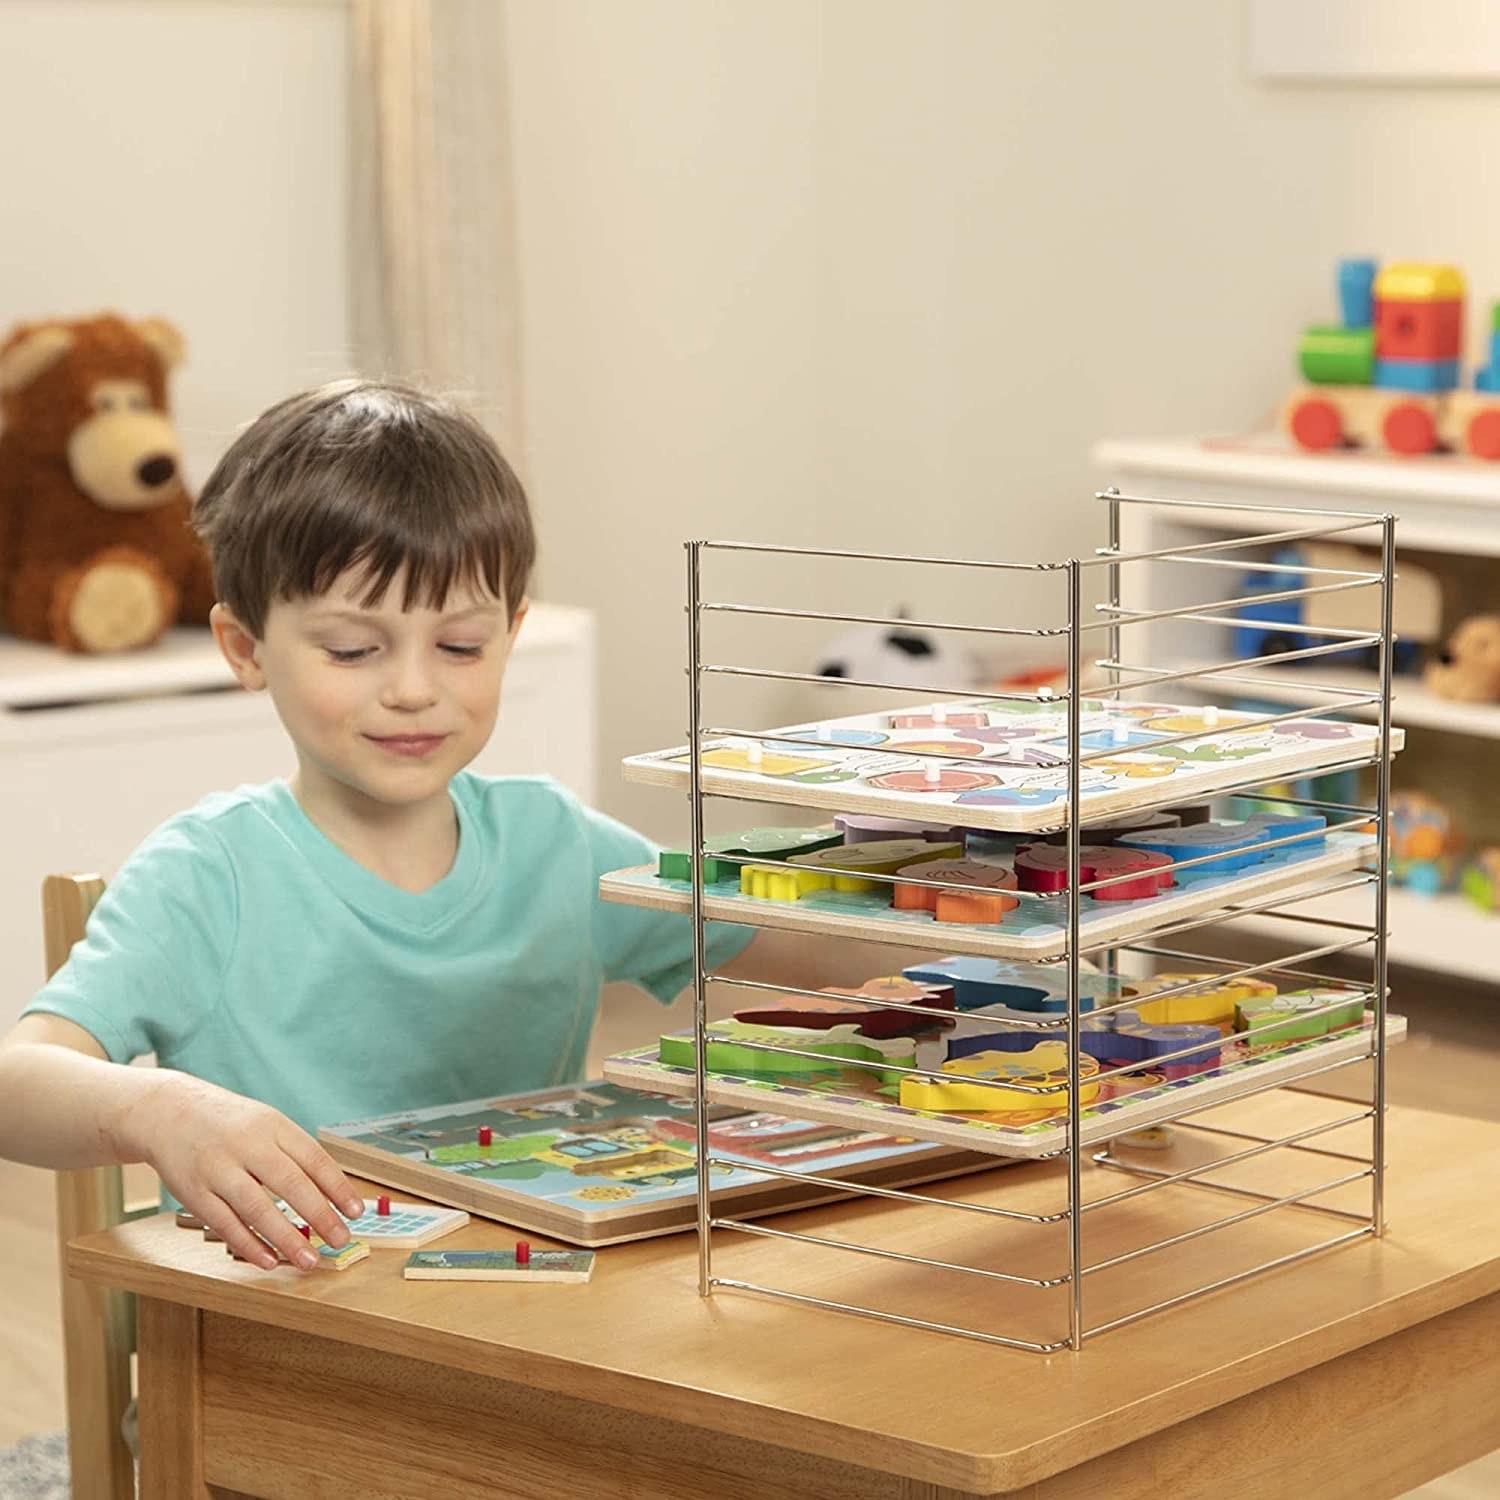  Melissa & Doug Deluxe Metal Wire Puzzle Storage Rack For 12  Small And Large Puzzles - Puzzle Rack Organizer